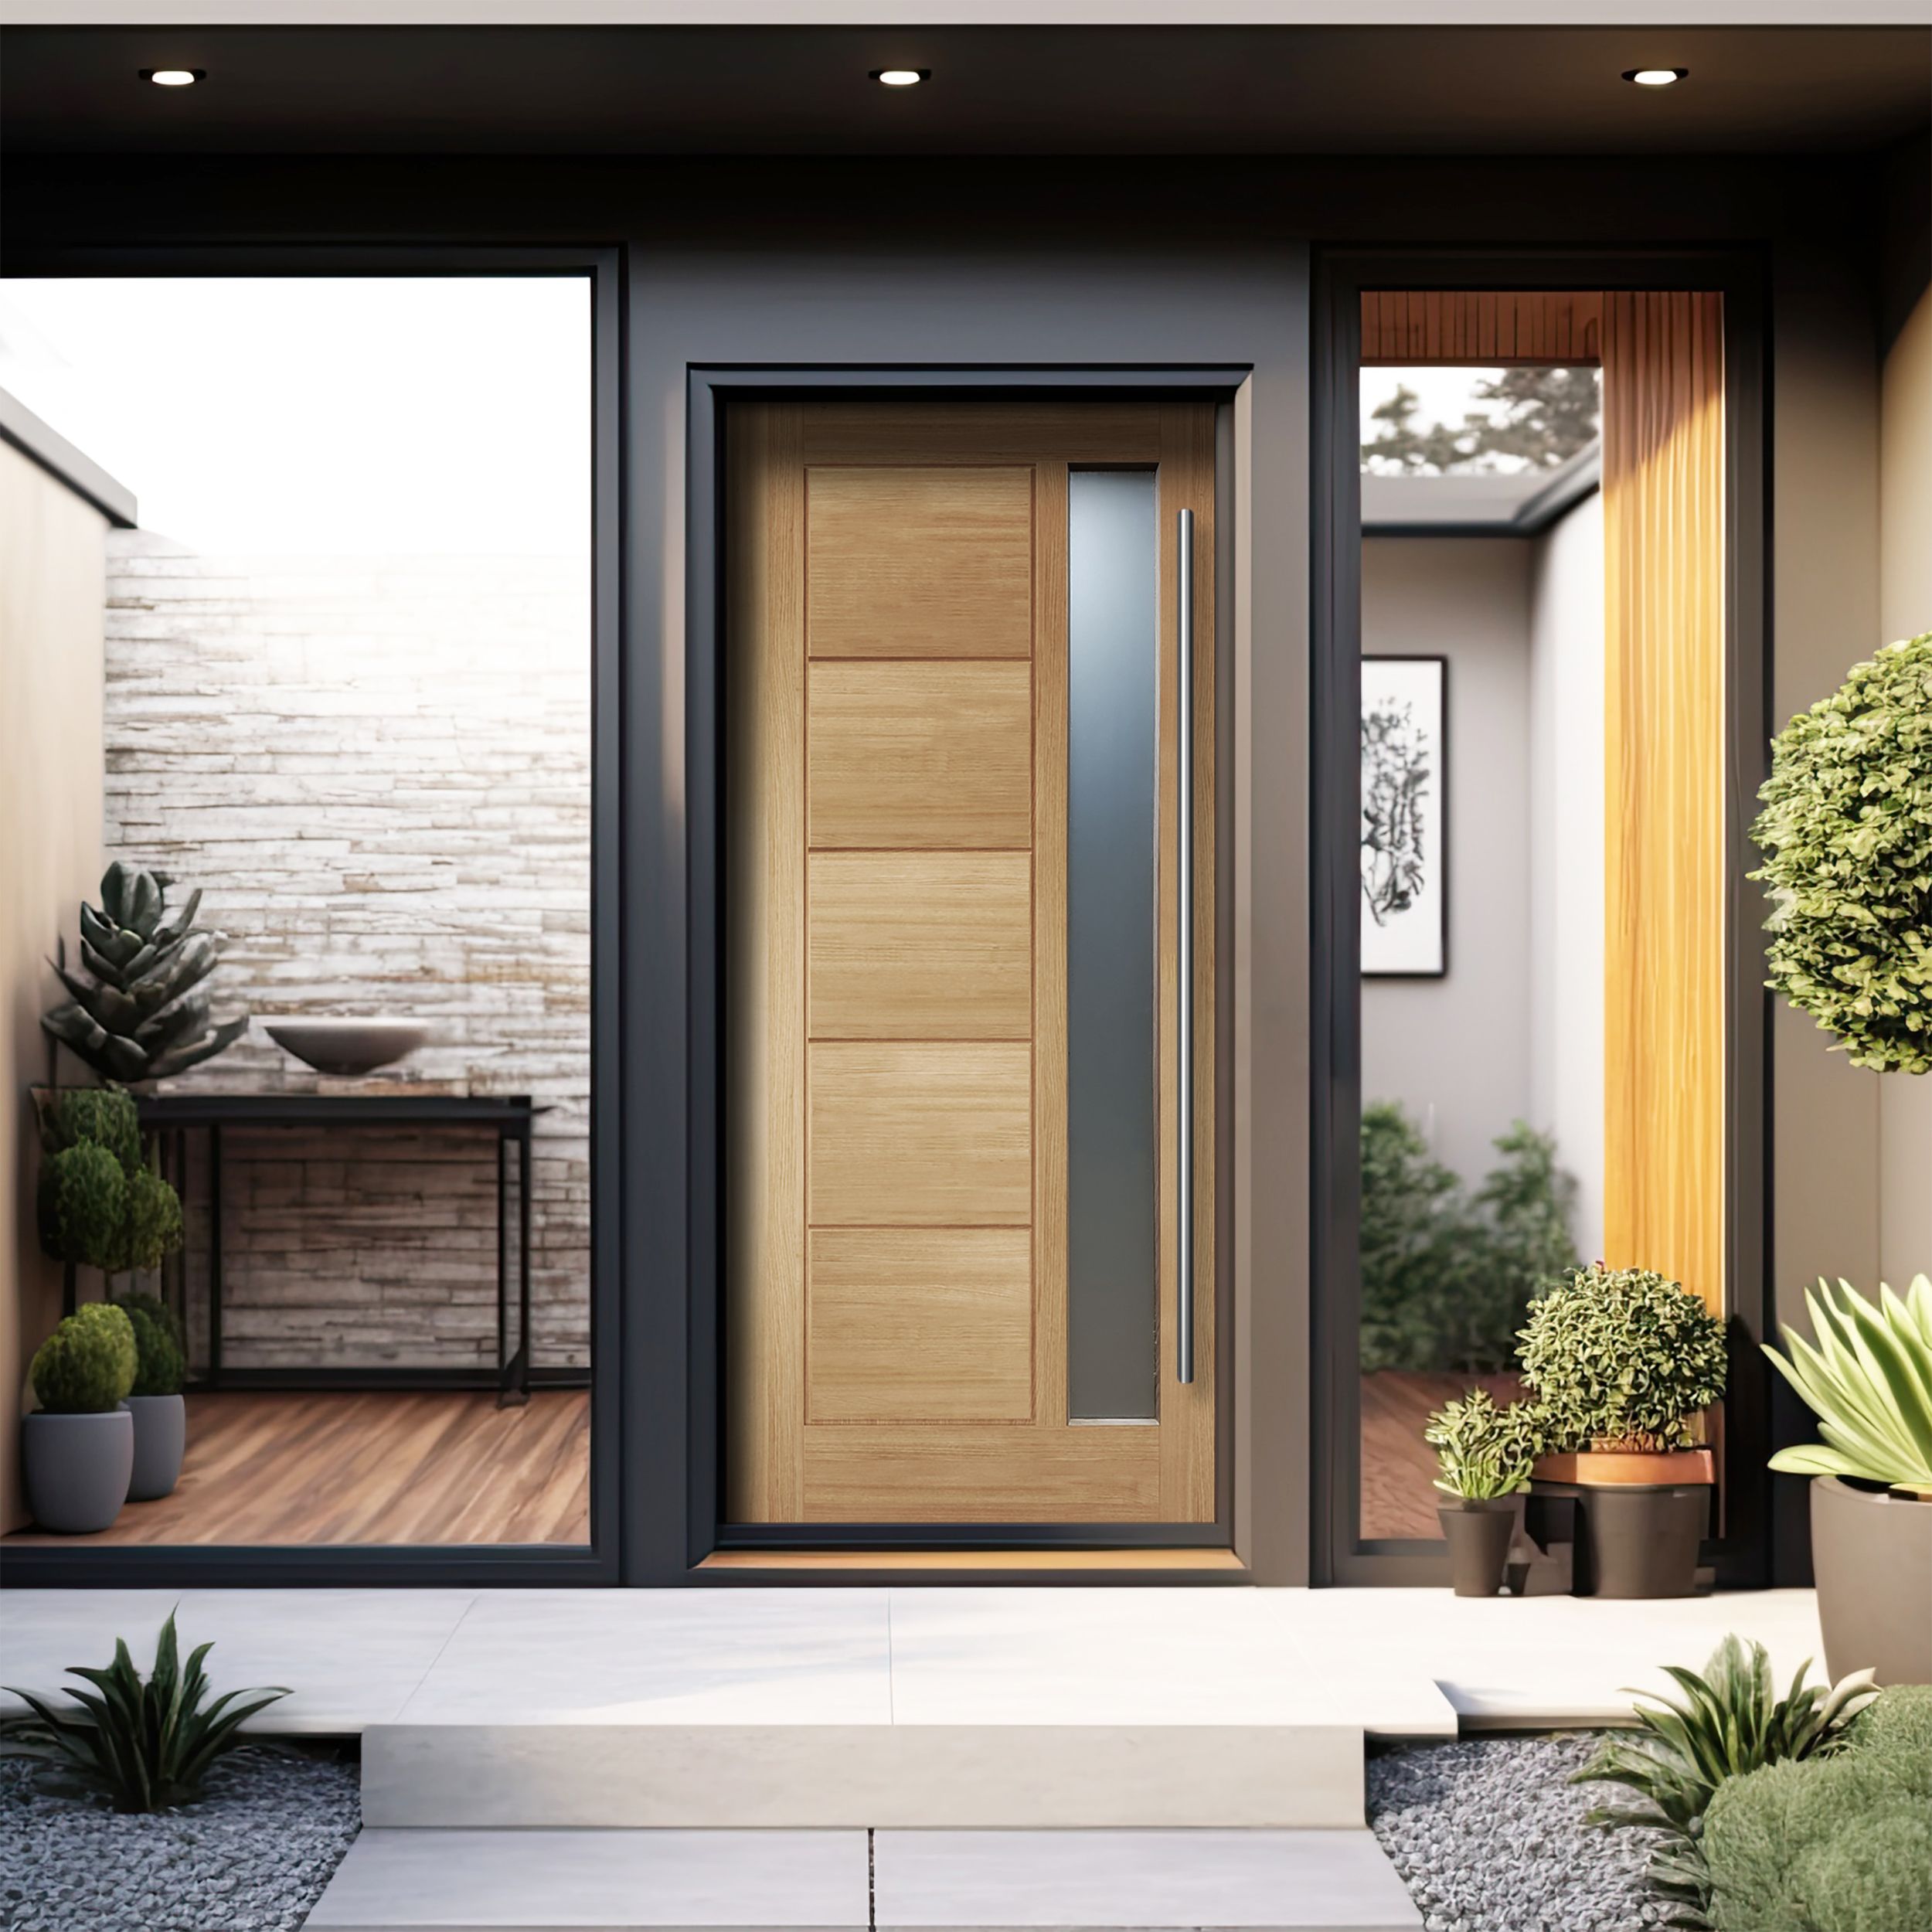 Linear 5 panel Frosted glass Obscure Timber White oak veneer Swinging External Front Door, (H)1981mm (W)838mm